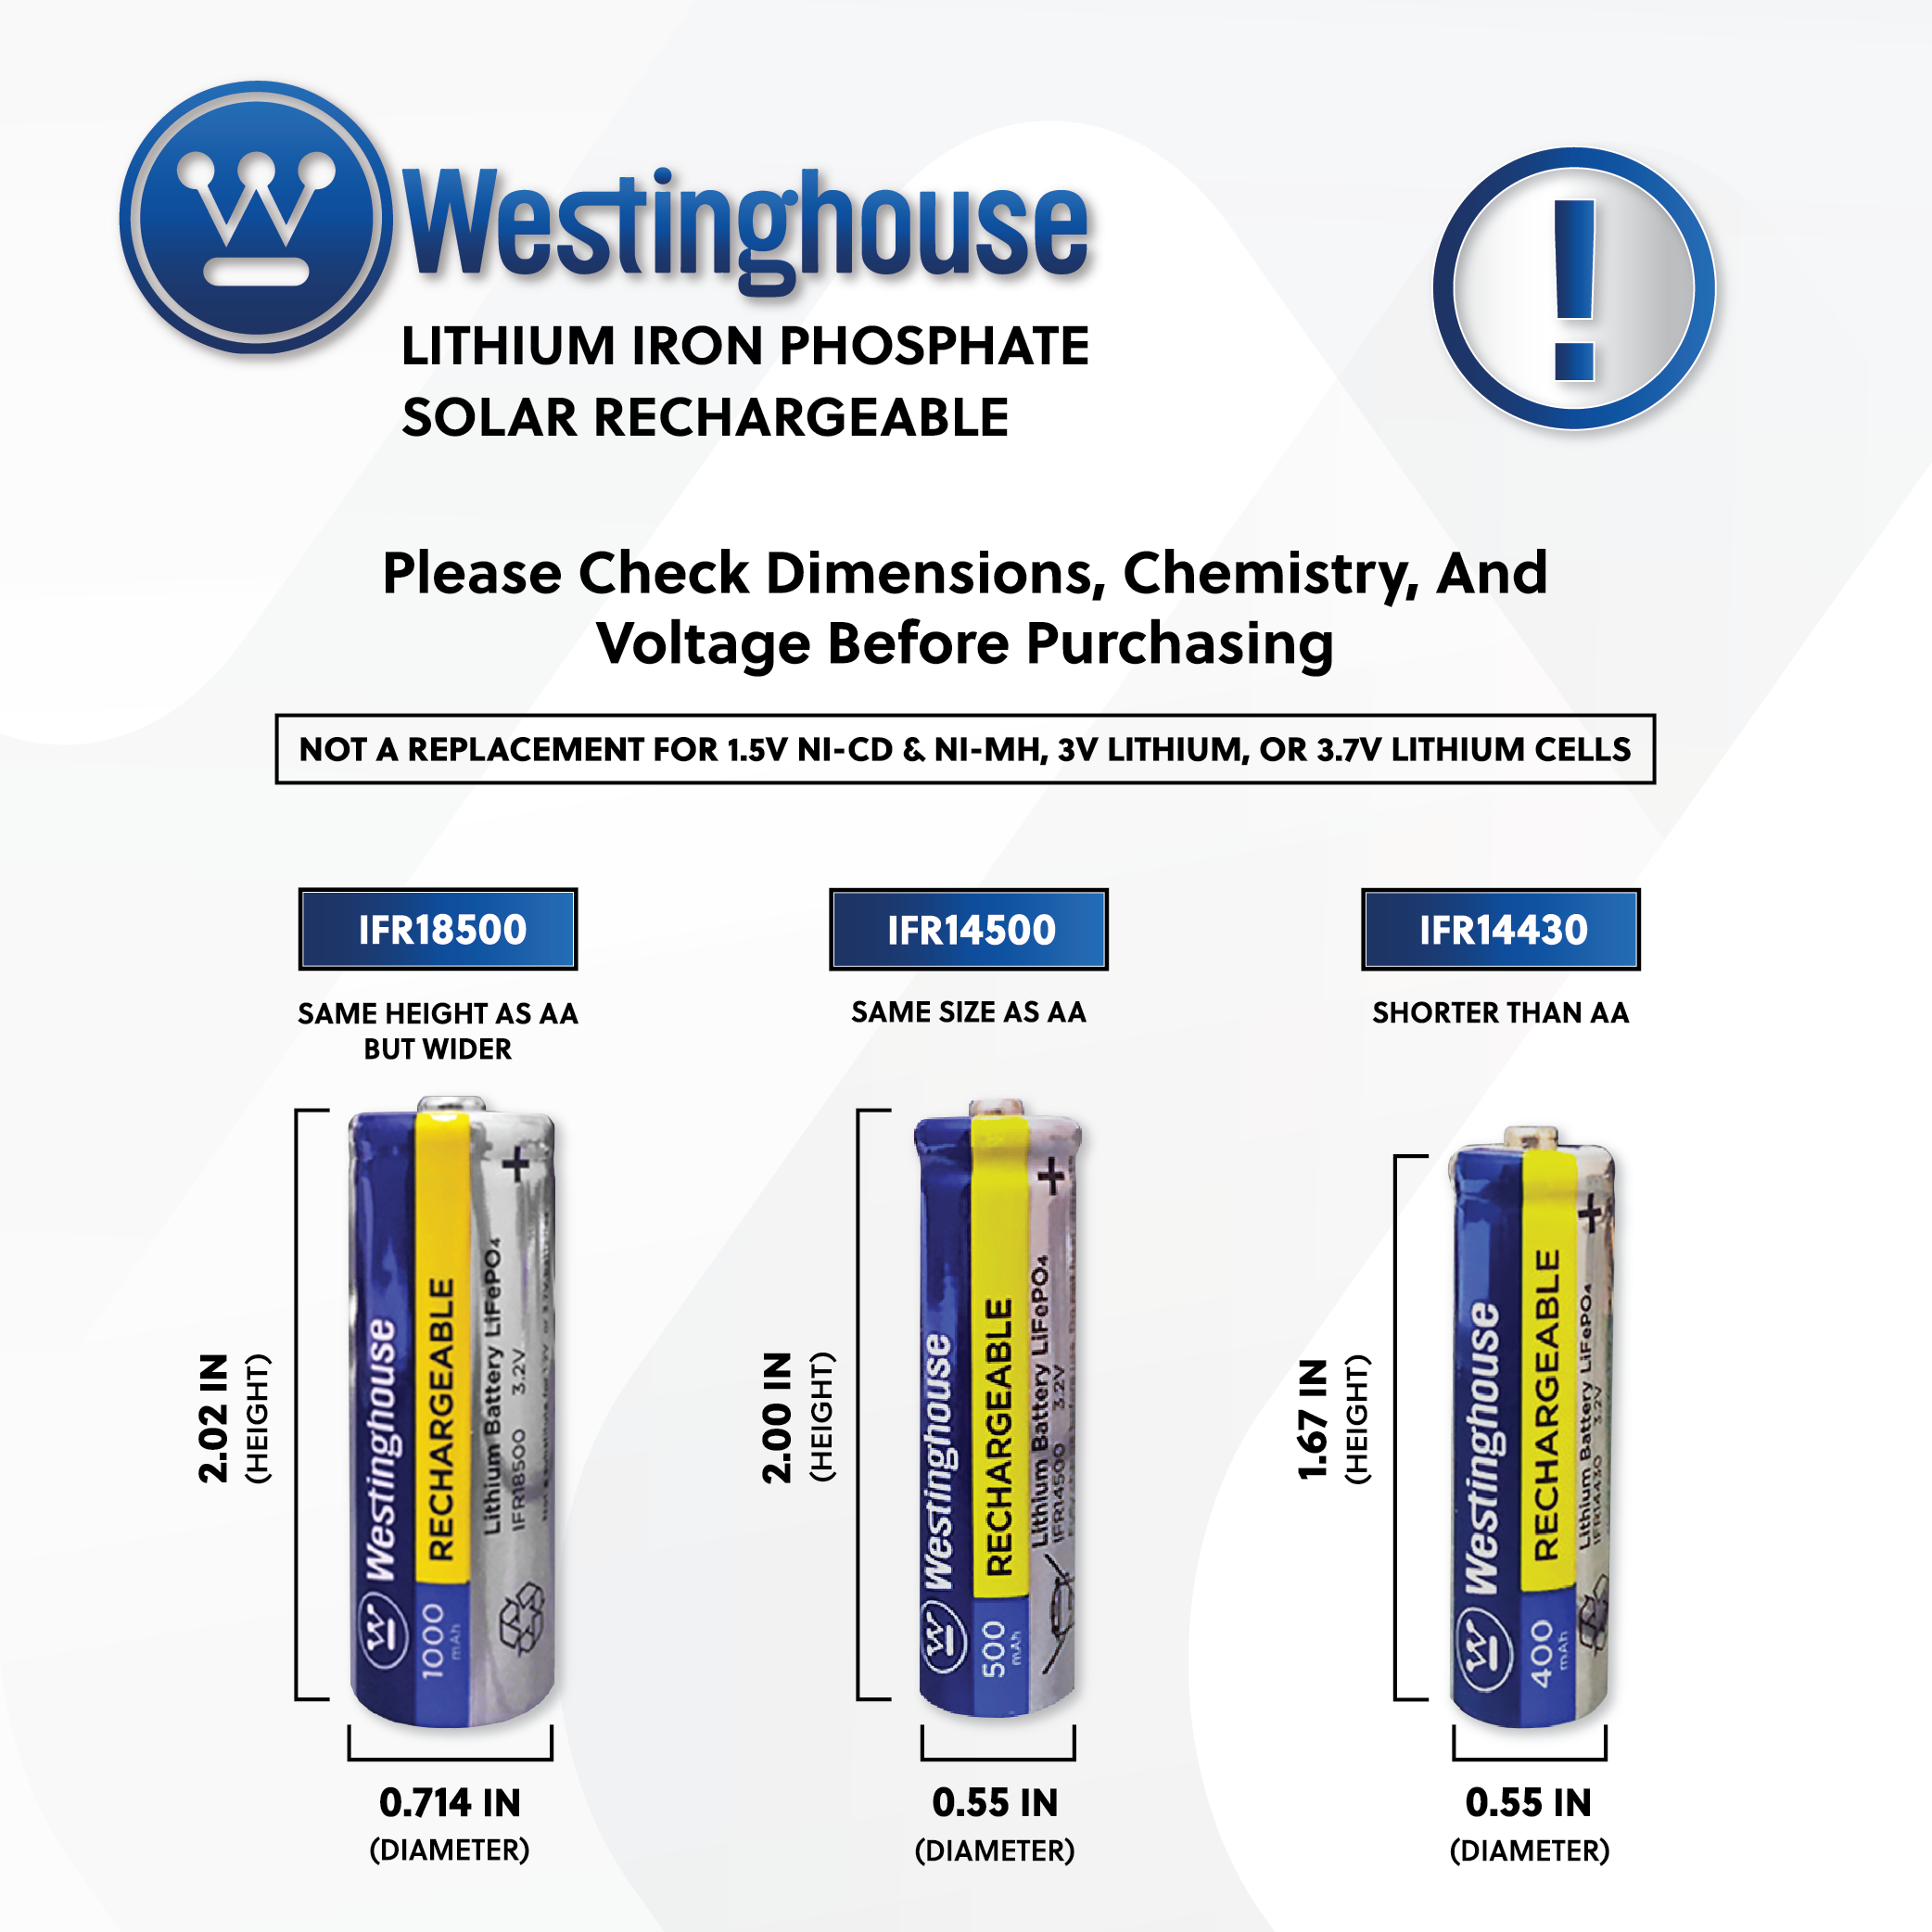 Westinghouse Life-PO4 14430 3.2v 400mah Solar Rechargeable Cardboard Box of 8